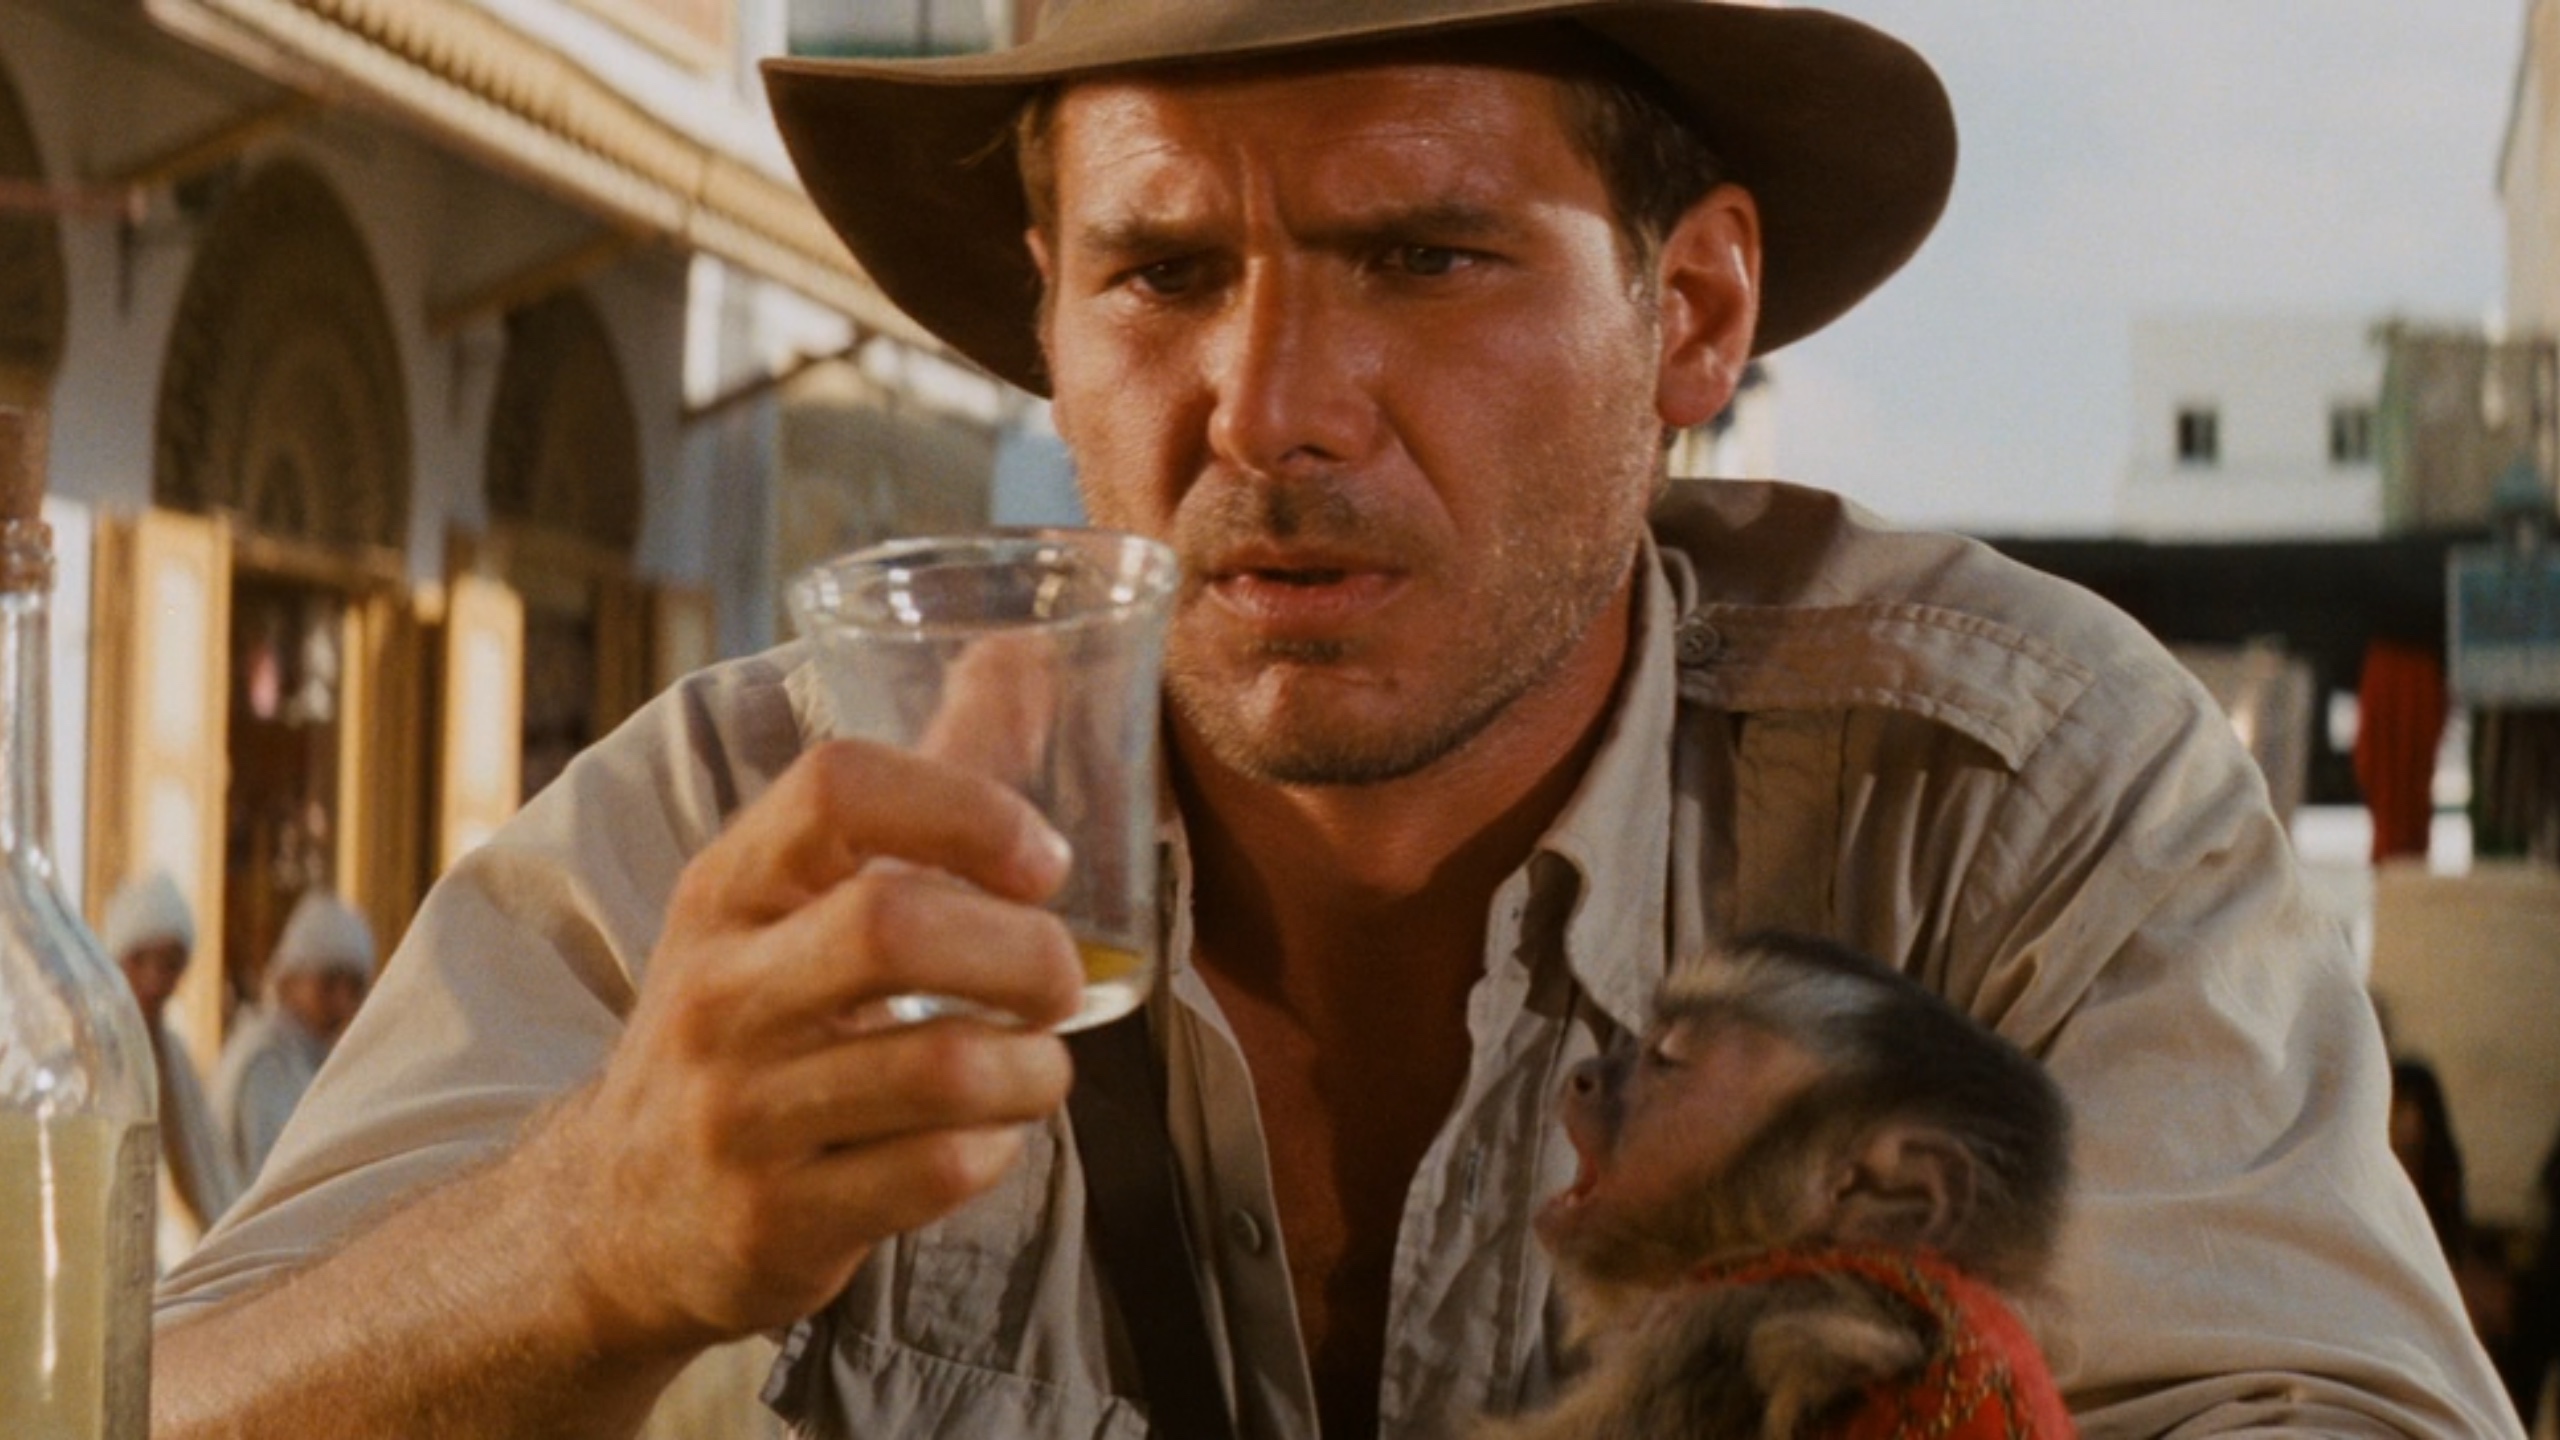 “You Call This Archaeology?”: An Indiana Jones Drinking Game